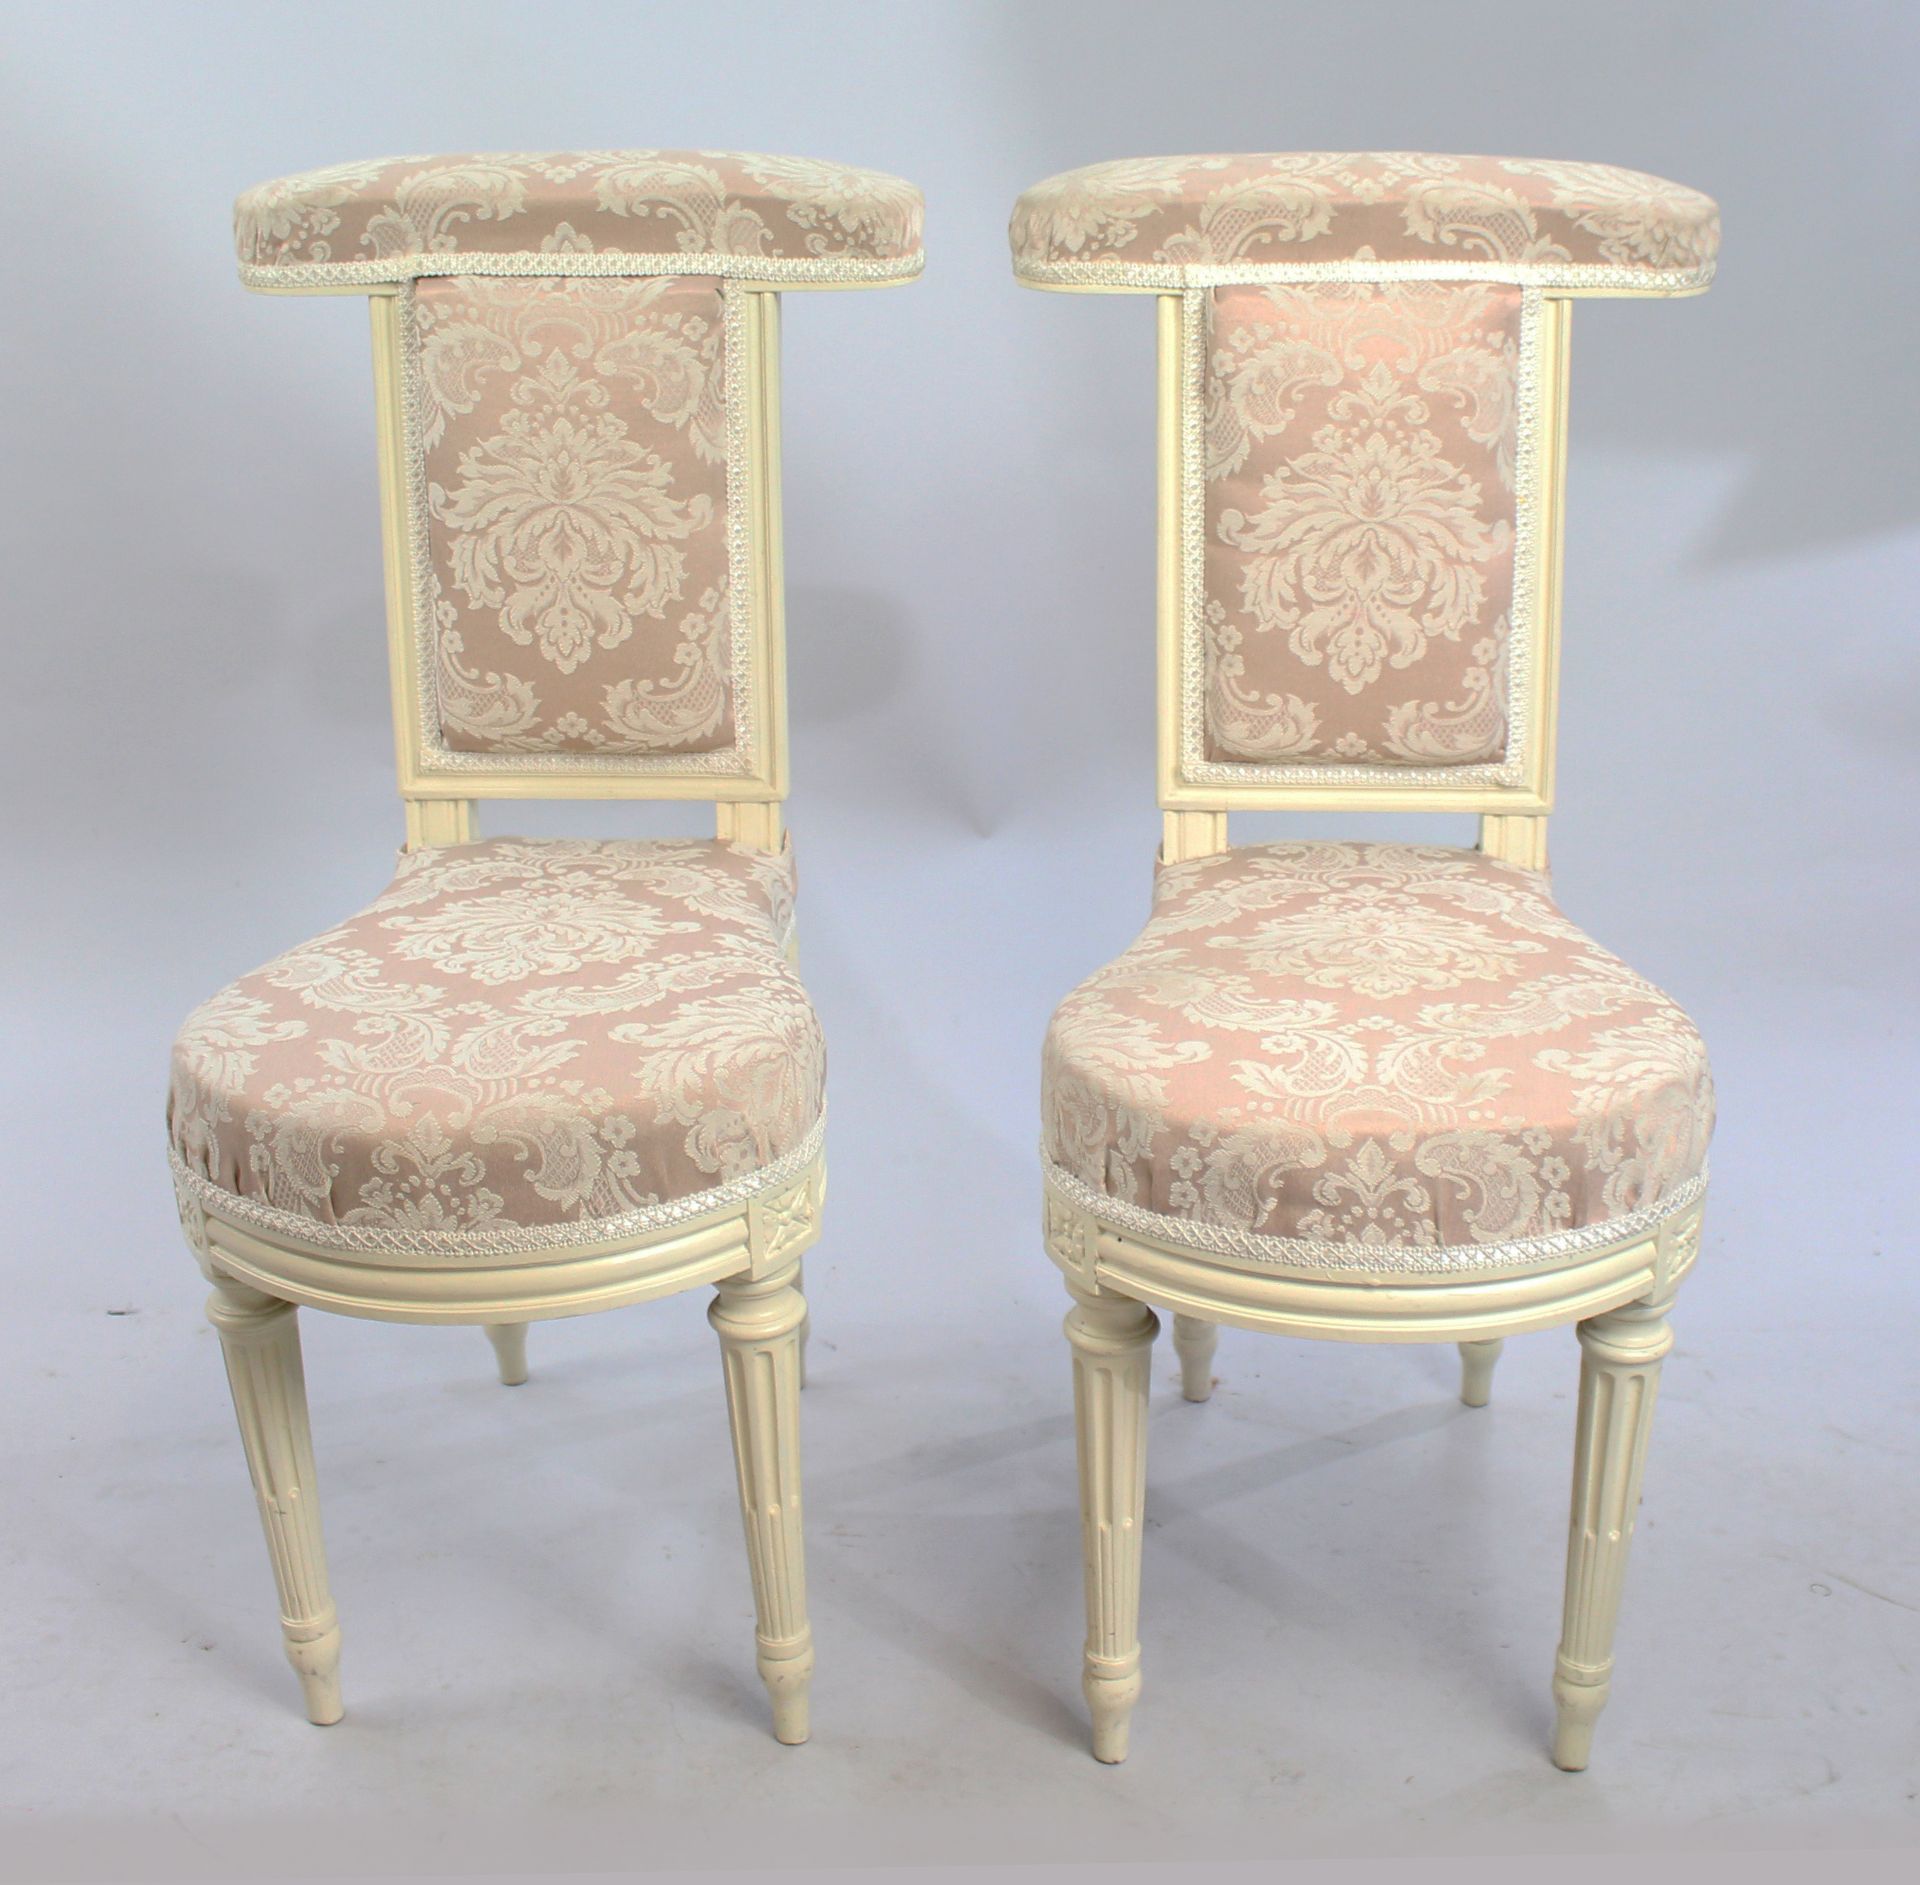 Pair of Early Antique French Painted Voyeuse Chairs